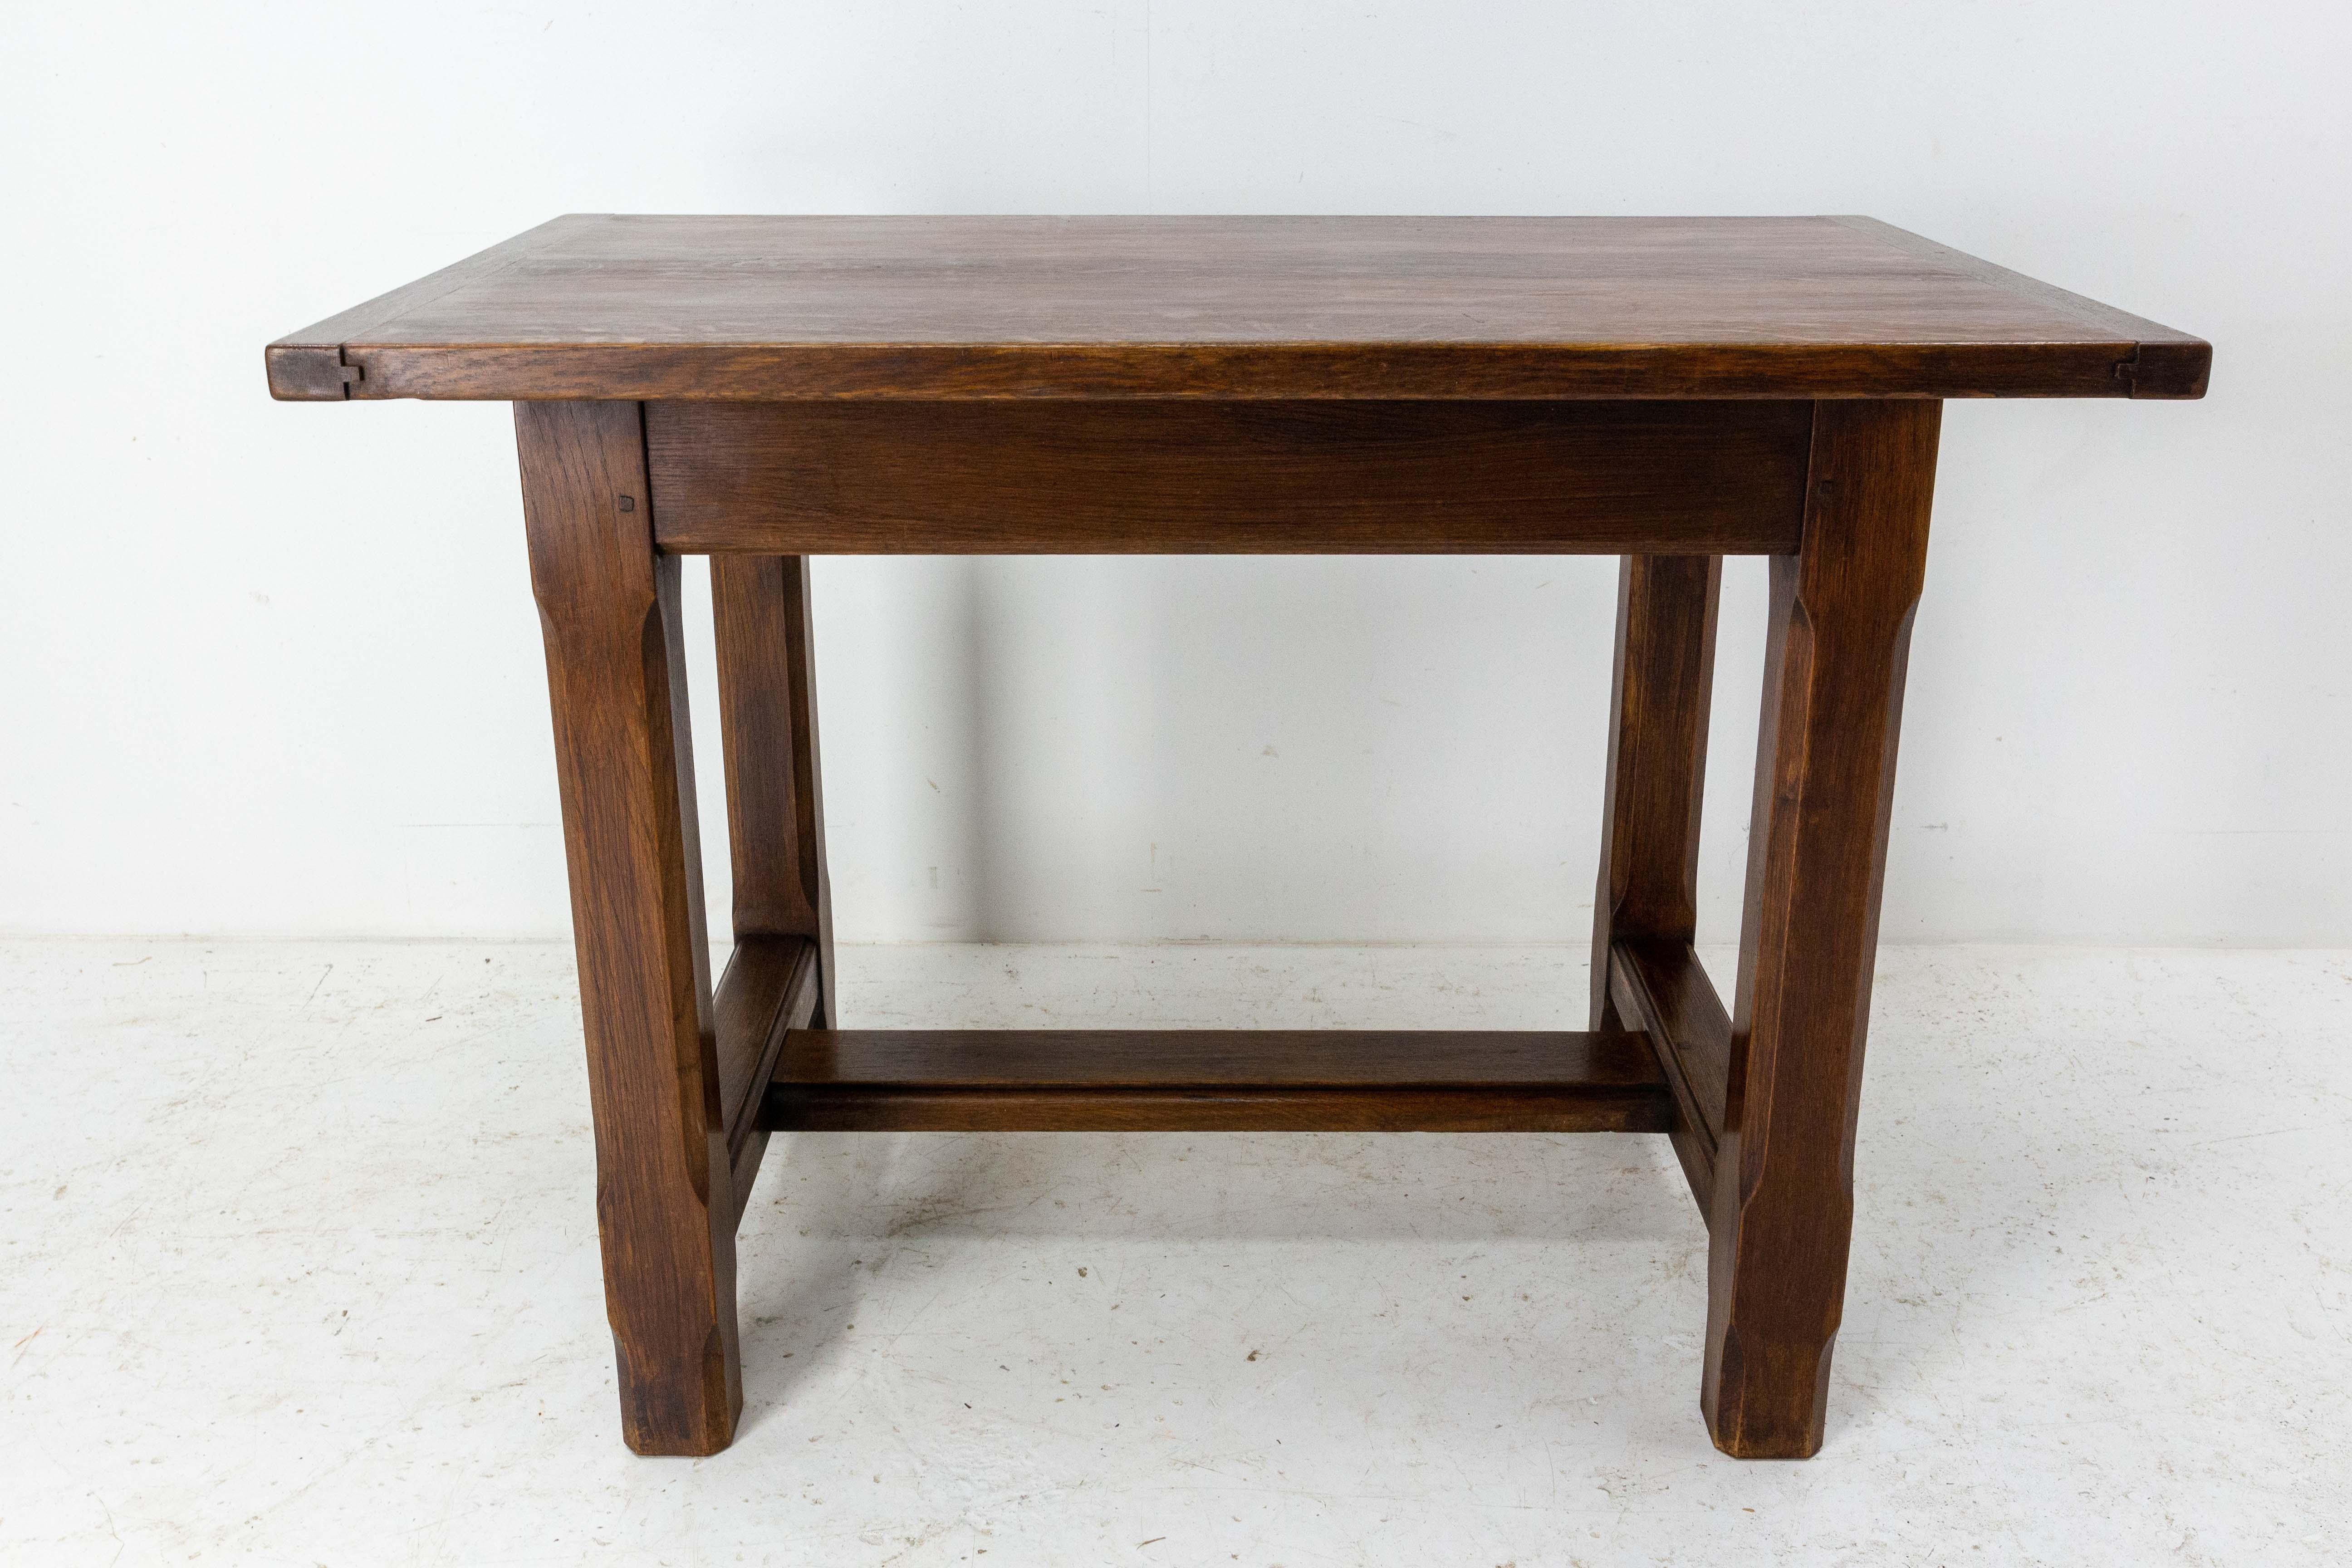 French little dining table in massive oak.
Mid-century, circa 1970.
Dimension between the floor and the table : 24.41 in. (62 cm).
Good condition.

Shipping:
wooden case L 110 P69 H79 63kg.

